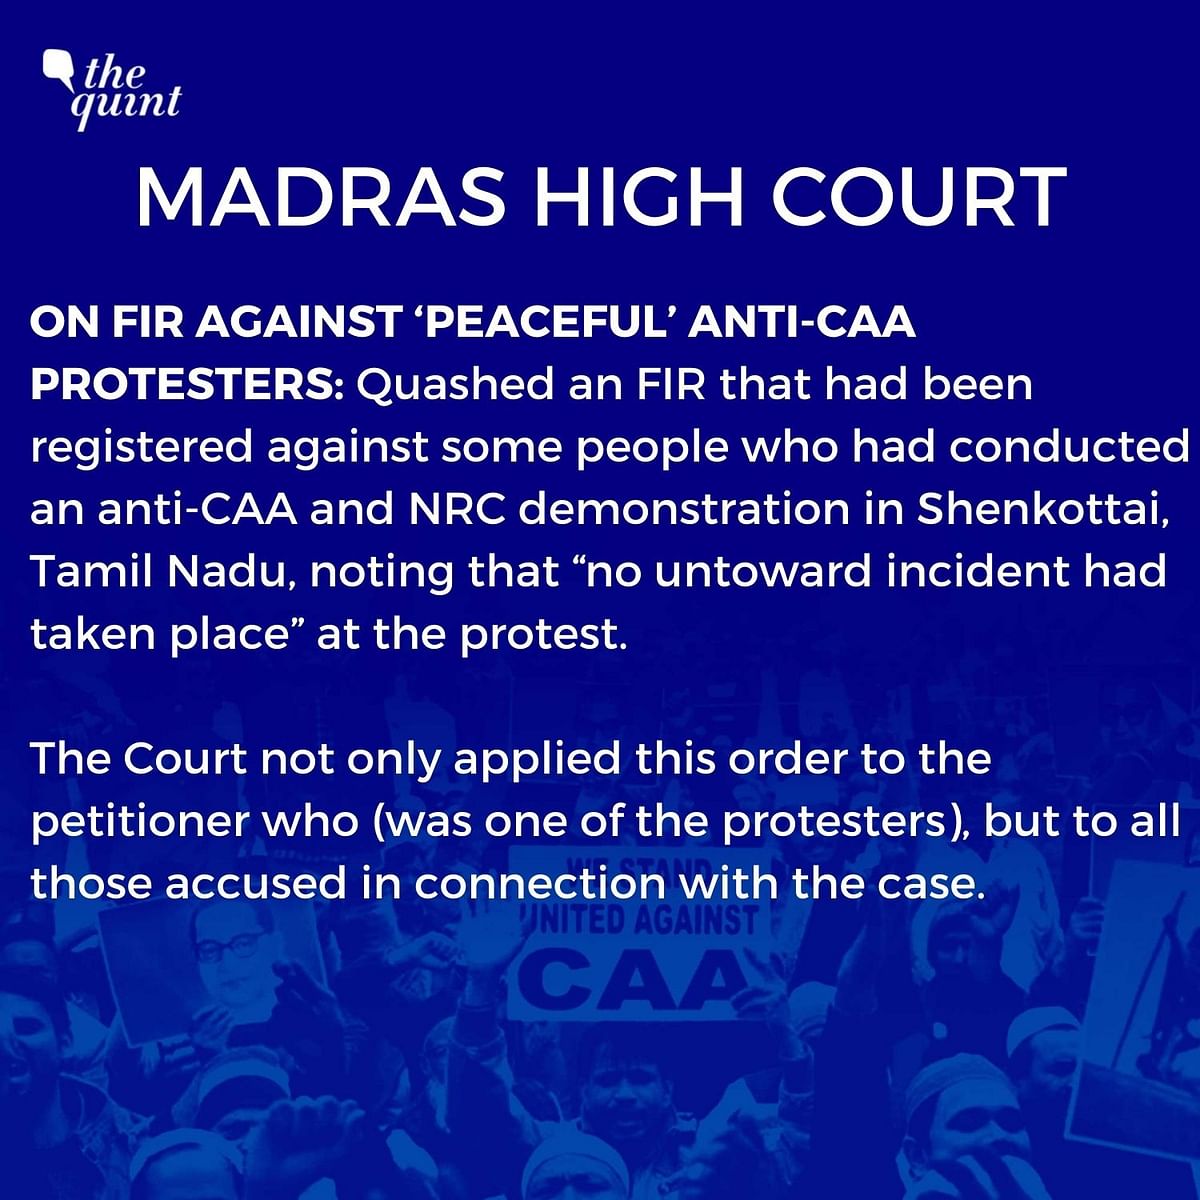 The reaction of the Supreme Court and the High Courts to anti-CAA protesters was starkly distinct in many ways.